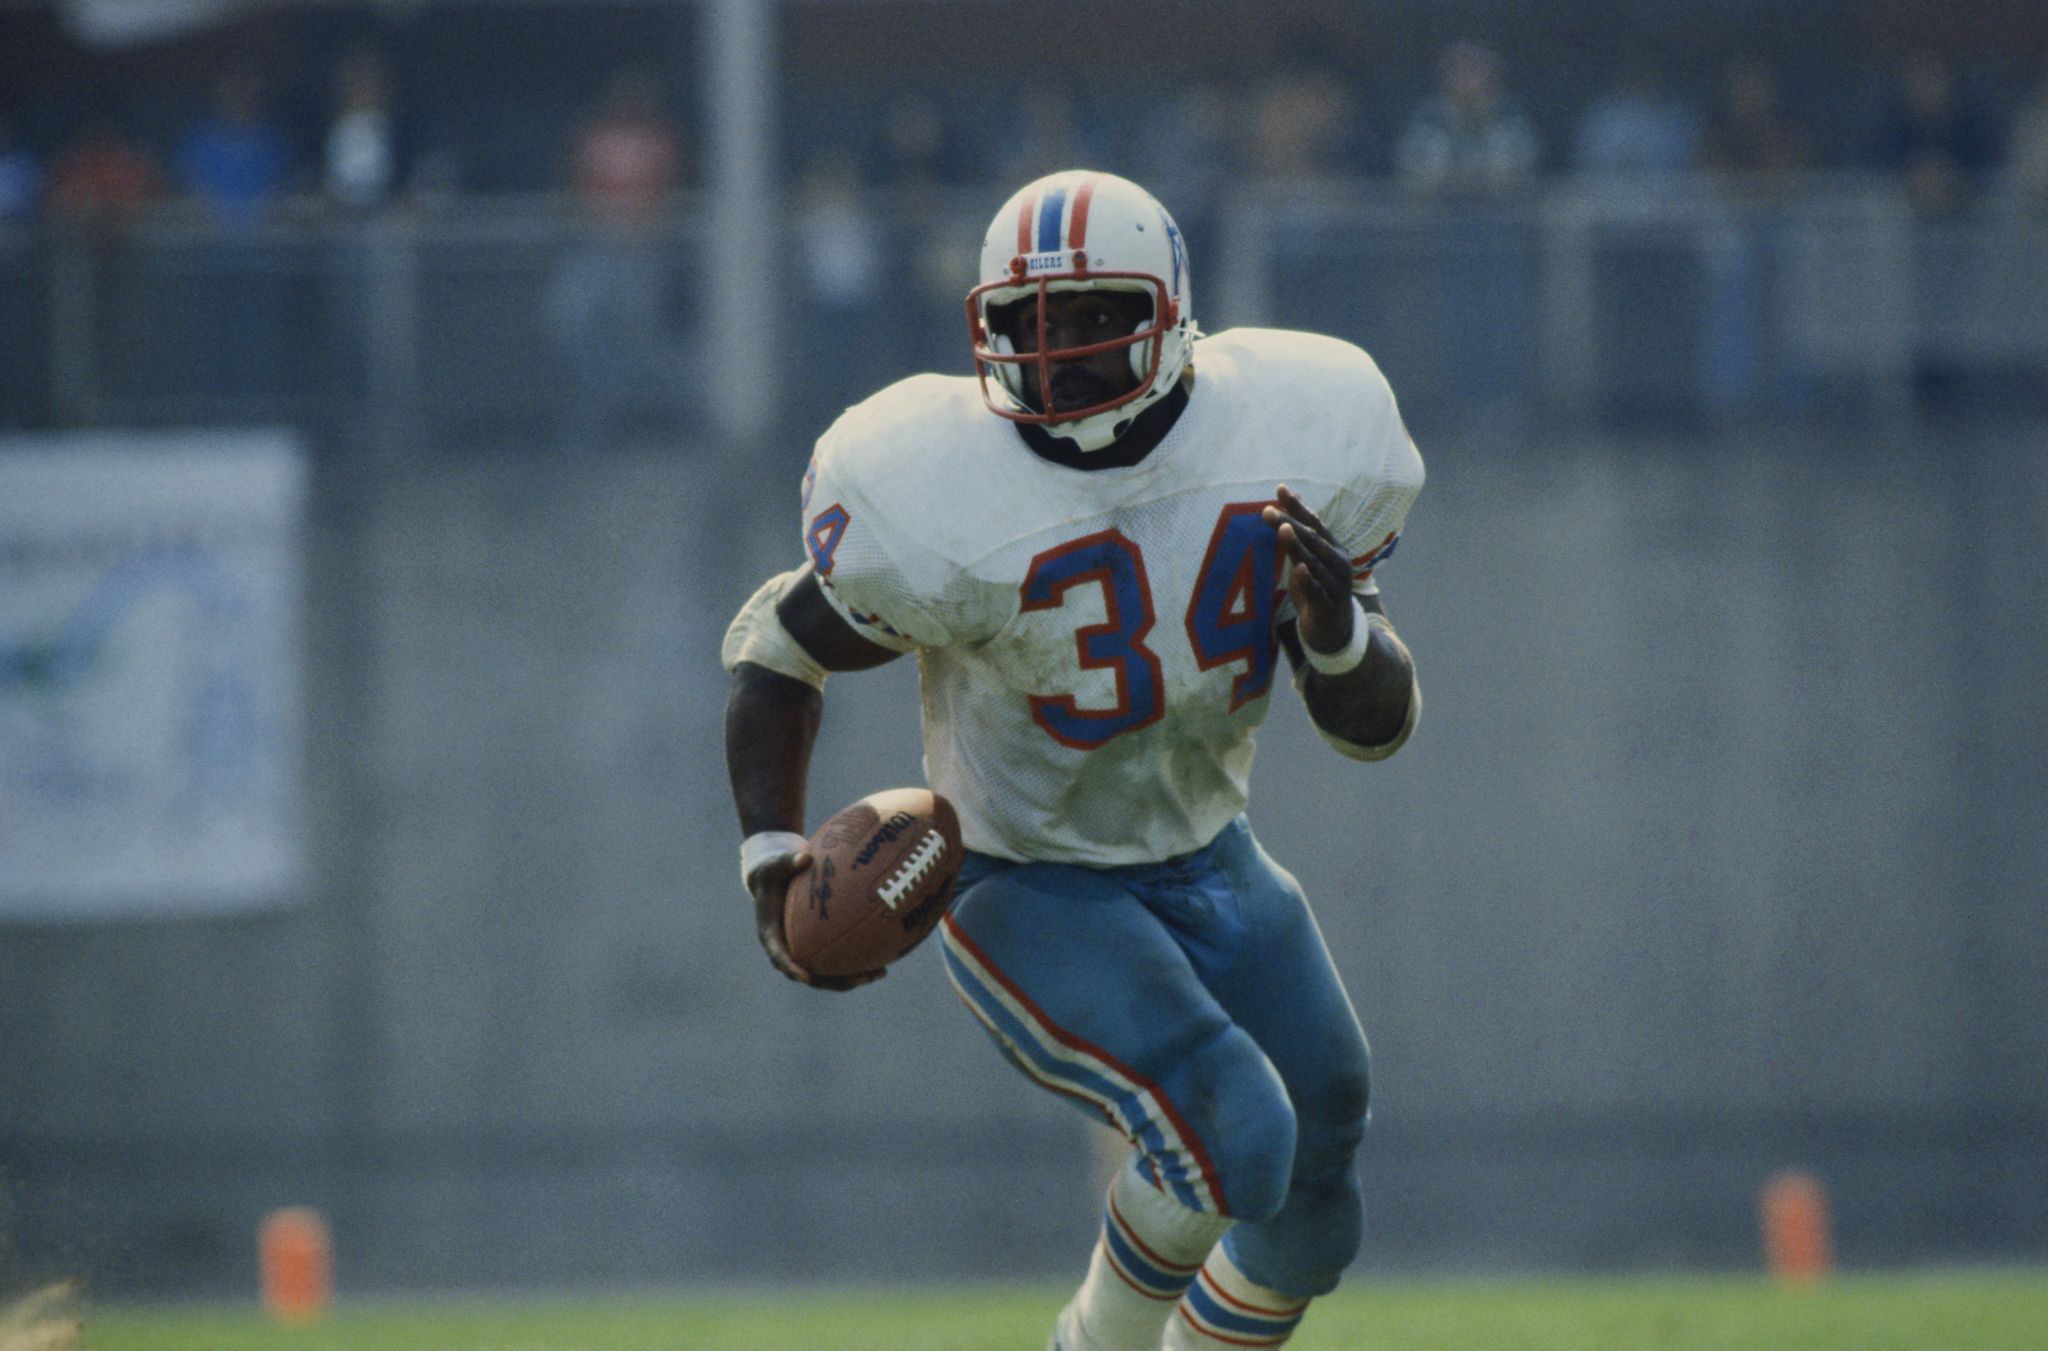 EARL CAMPBELL HOUSTON OILERS 1978 - 1983 